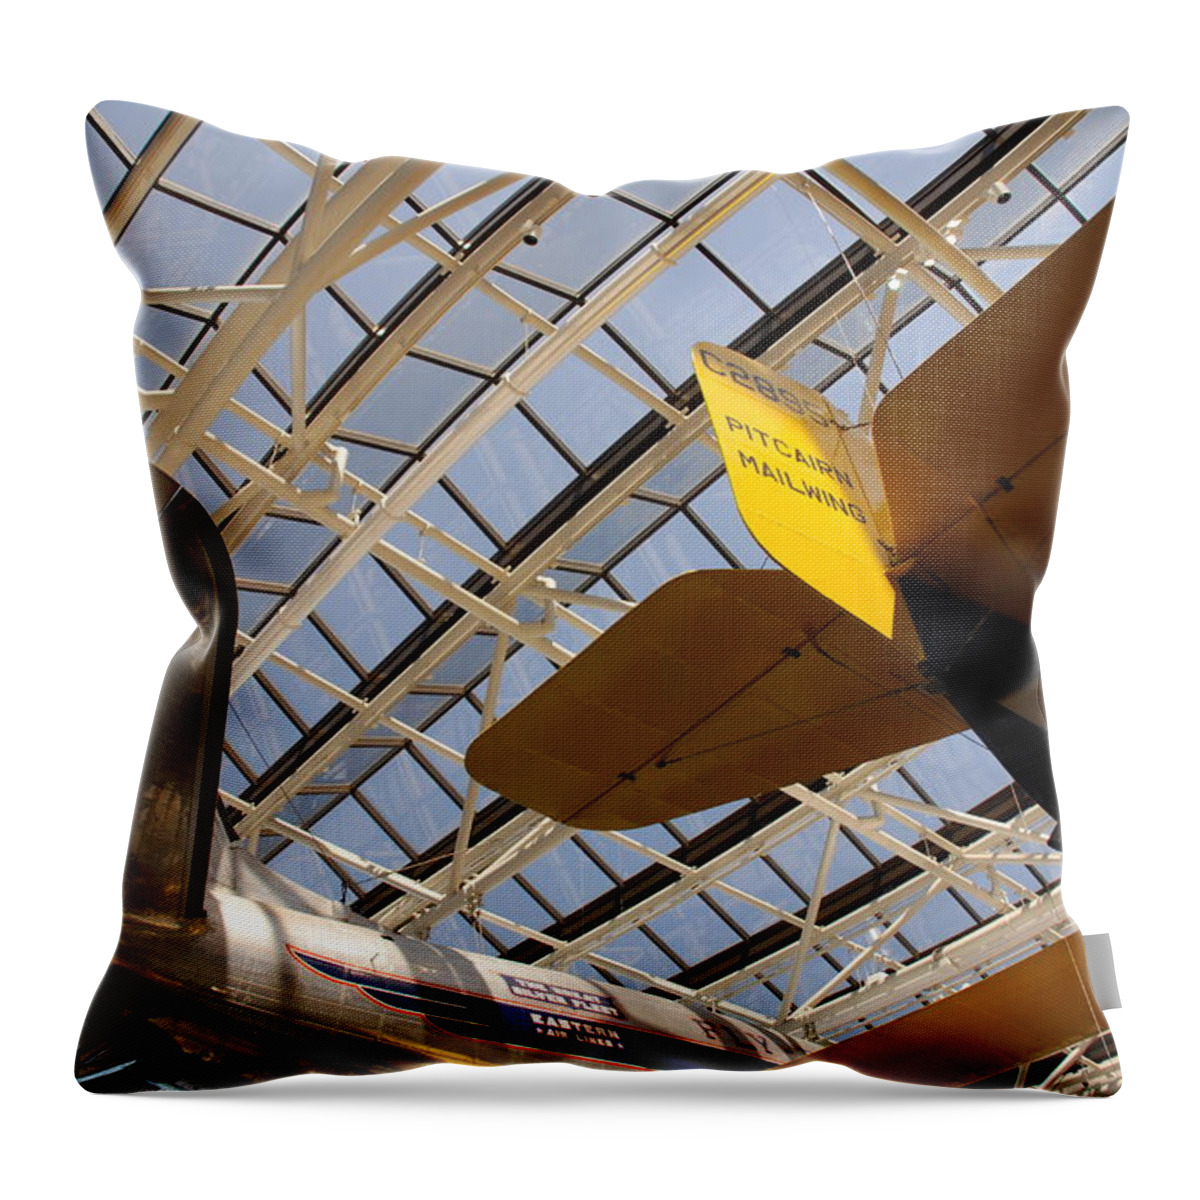 Planes Throw Pillow featuring the photograph Airplane Rudders by Kenny Glover